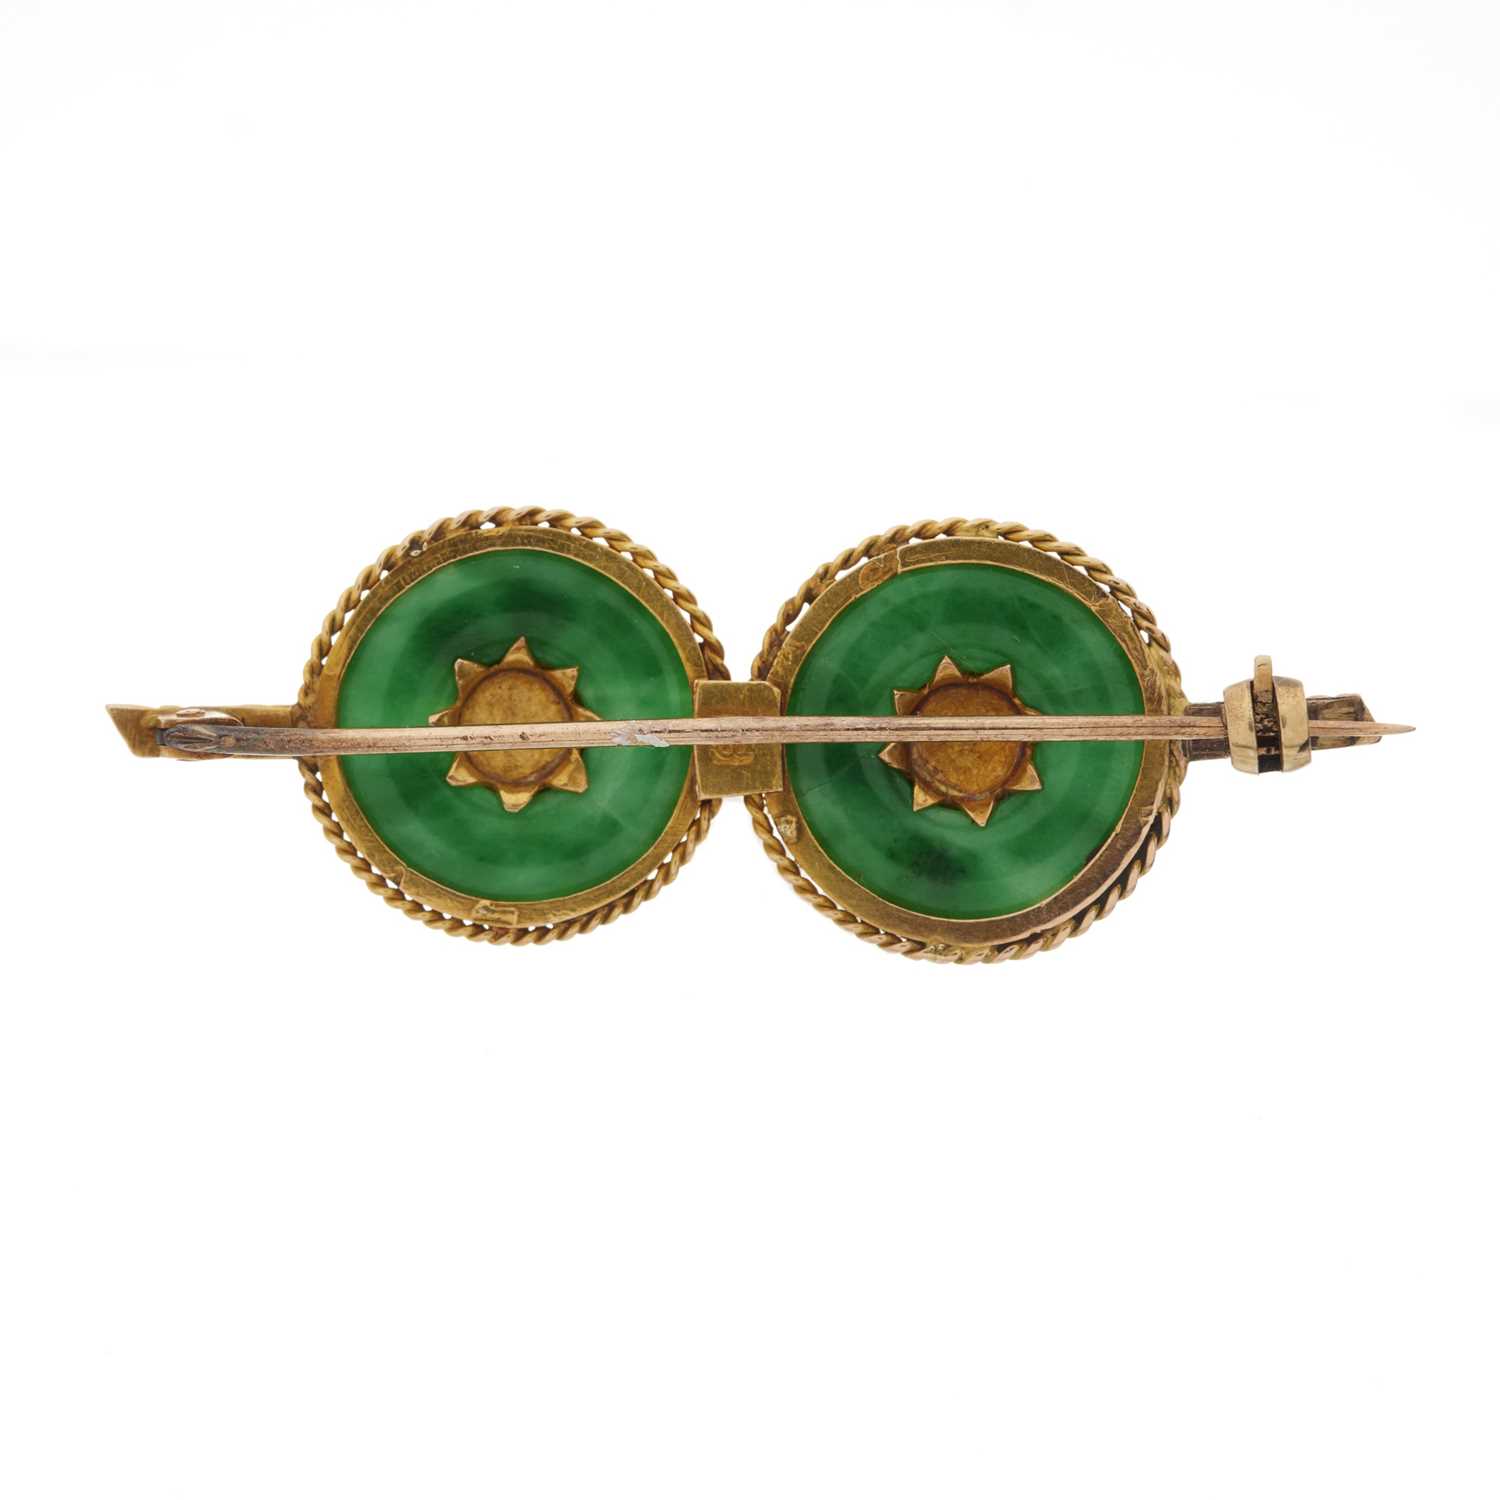 An 18ct gold jade disc brooch - Image 2 of 2